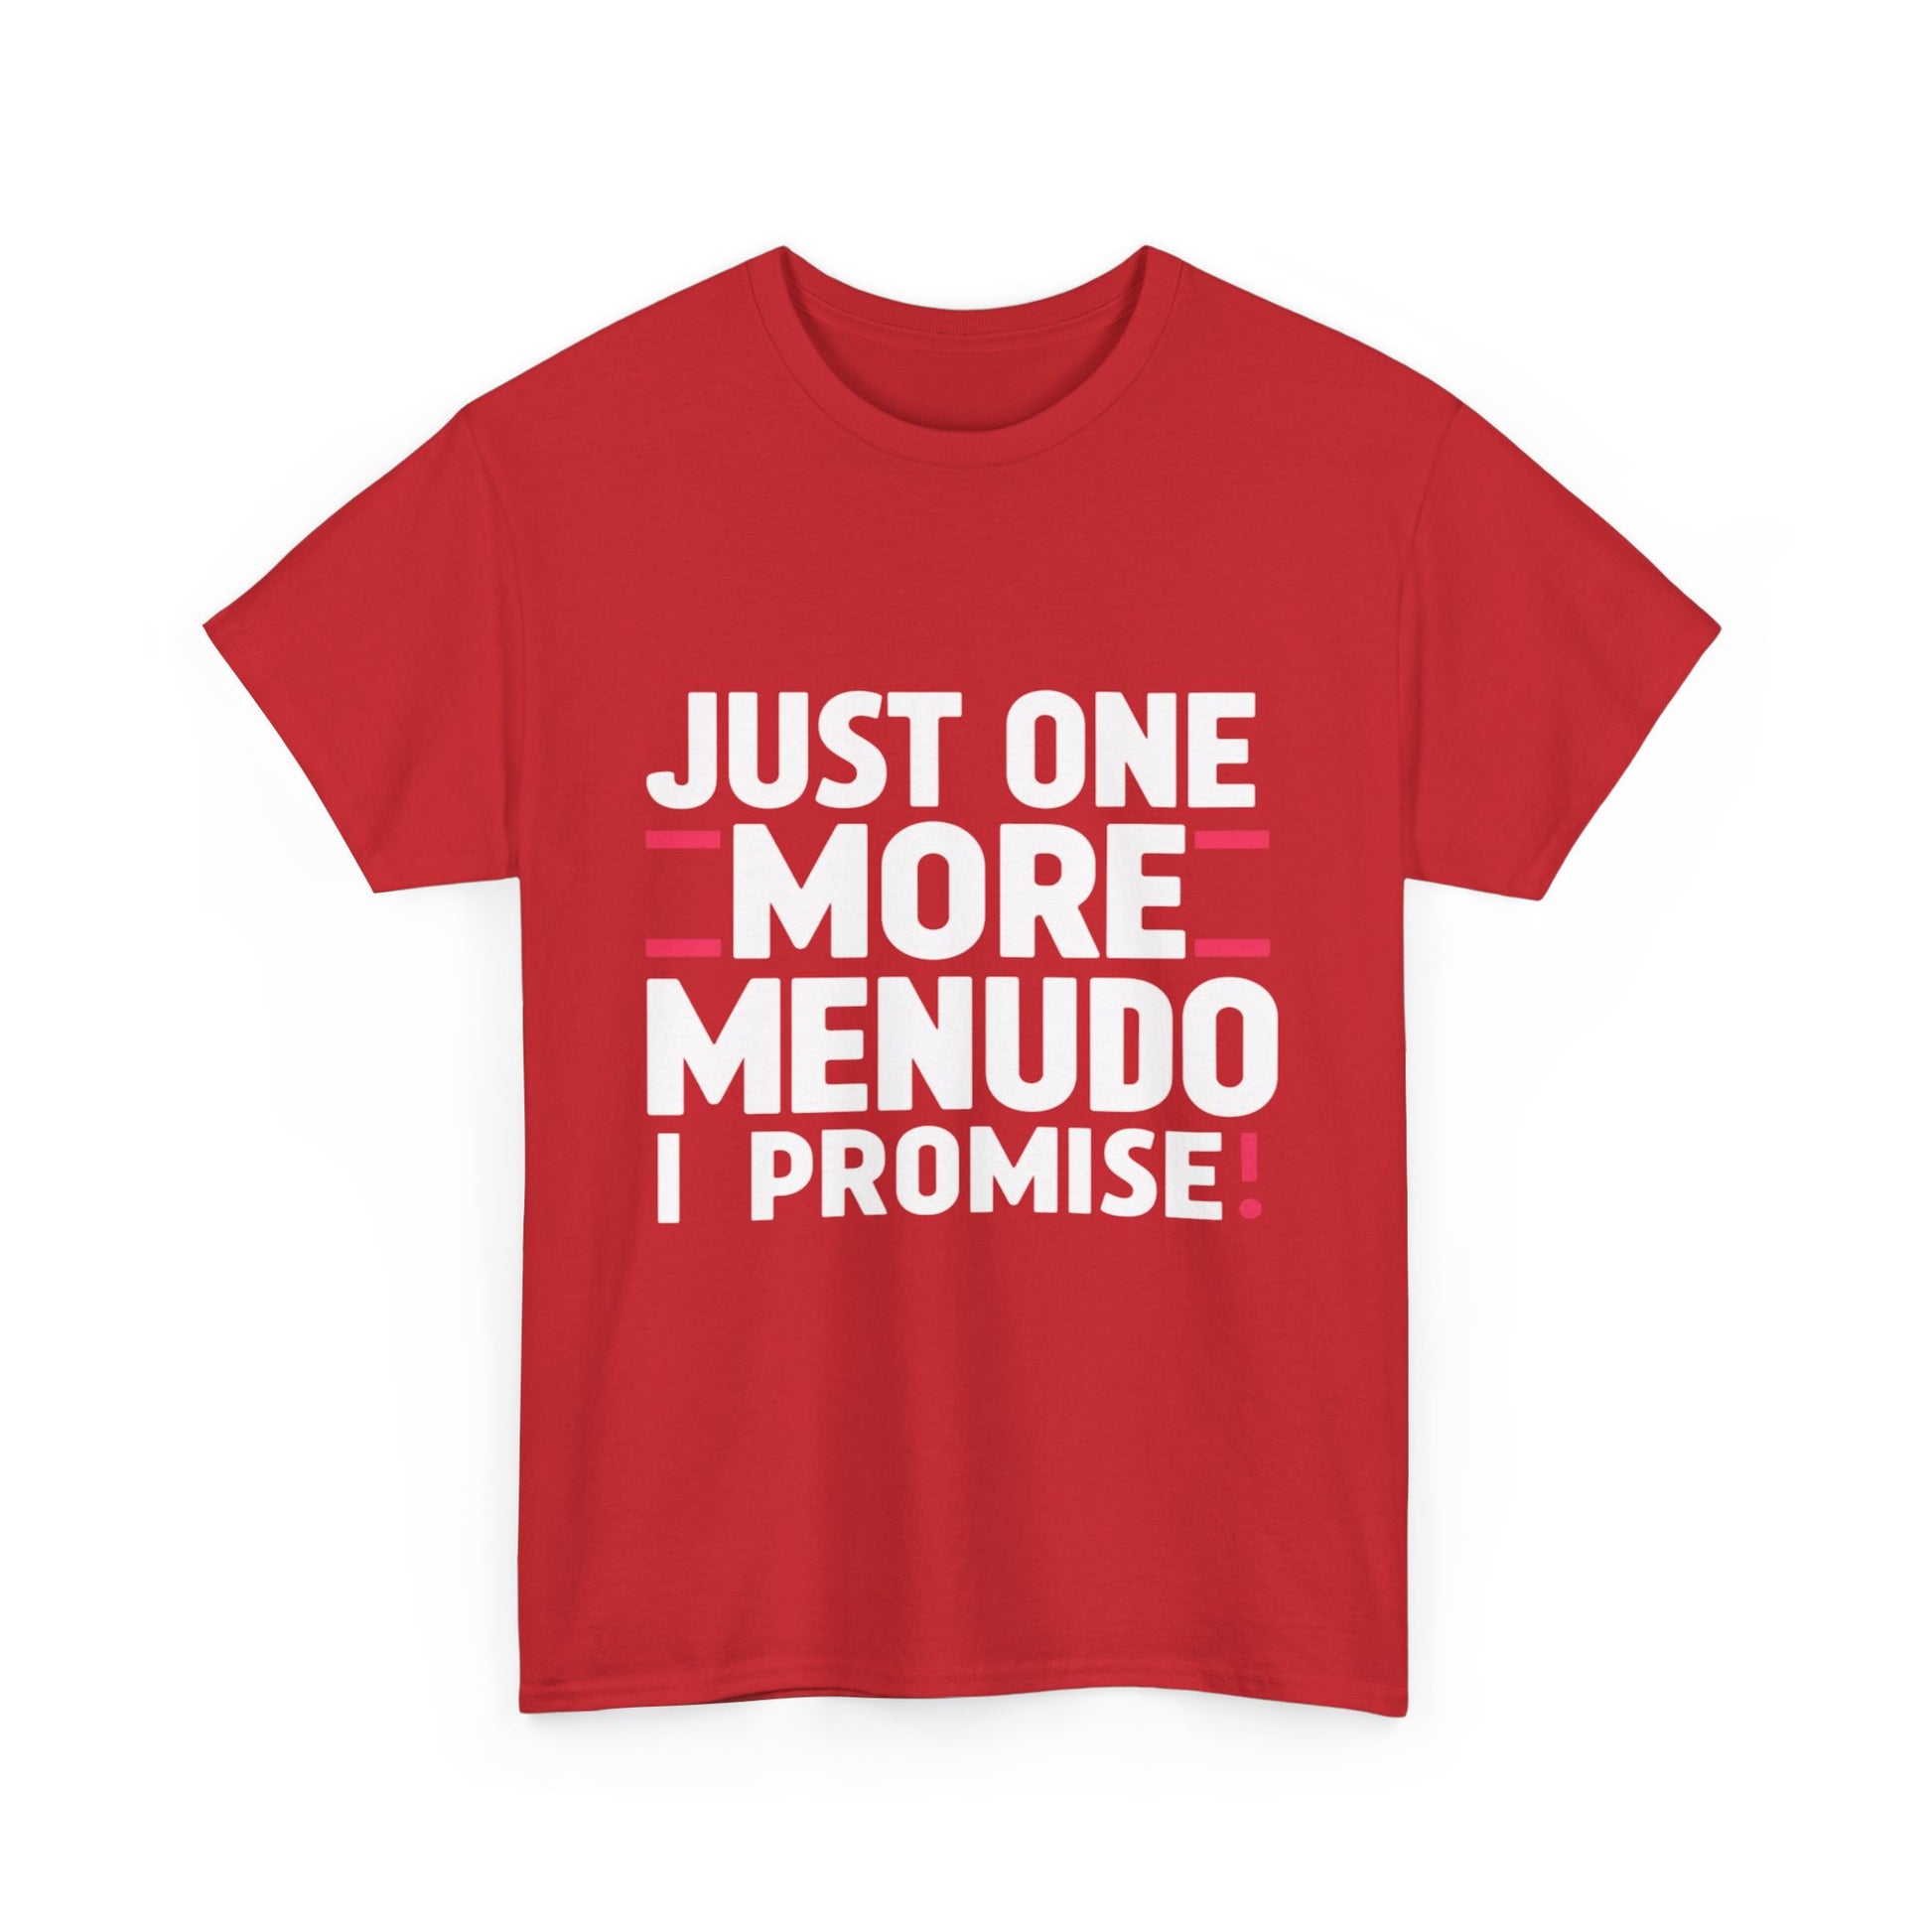 Just One More Menudo I Promise Mexican Food Graphic Unisex Heavy Cotton Tee Cotton Funny Humorous Graphic Soft Premium Unisex Men Women Red T-shirt Birthday Gift-33